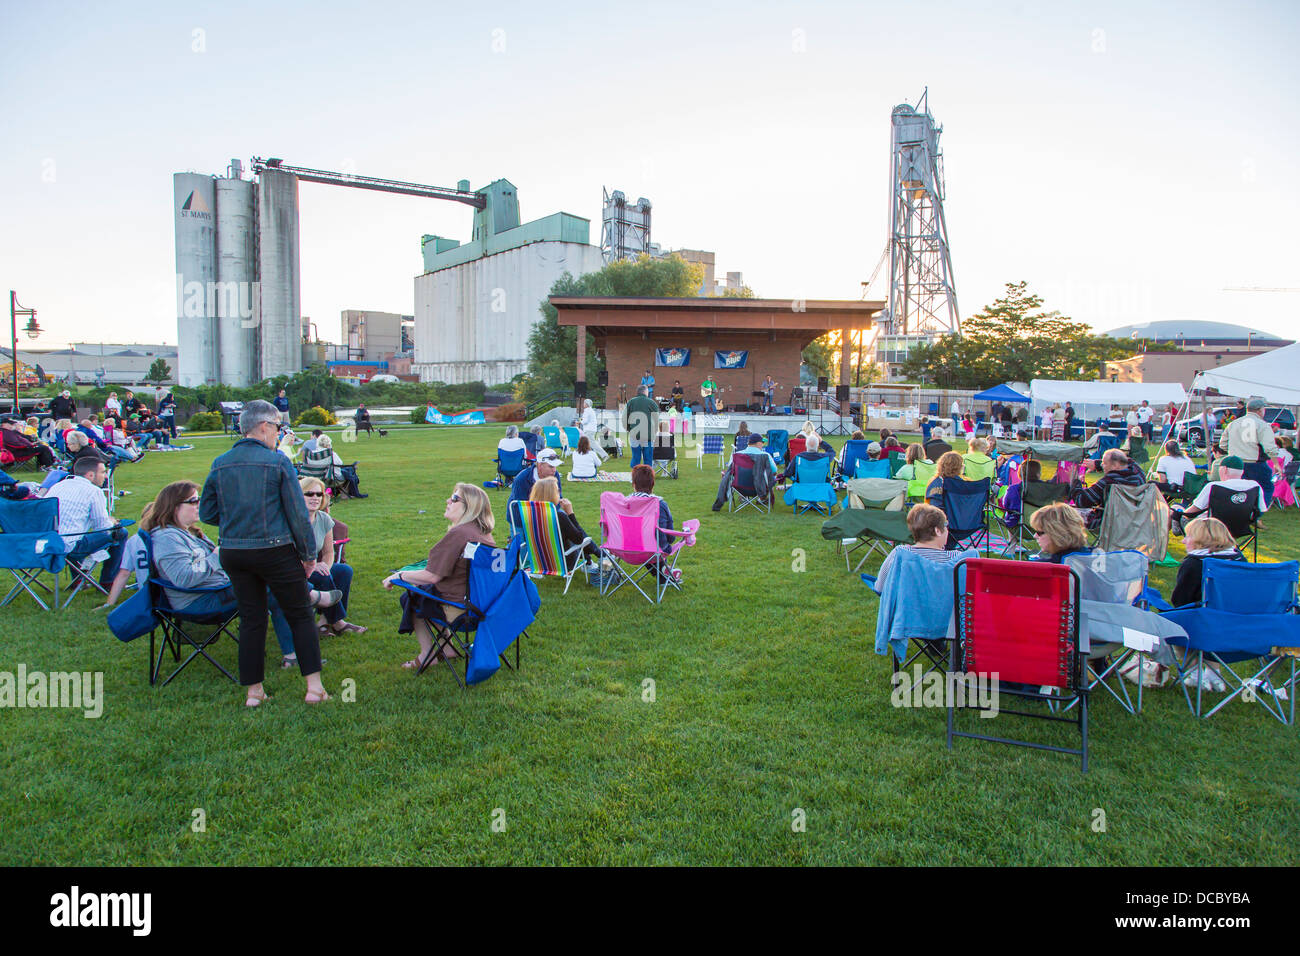 Outdoor music concert at River Fest Park in Buffalo New York United States Stock Photo